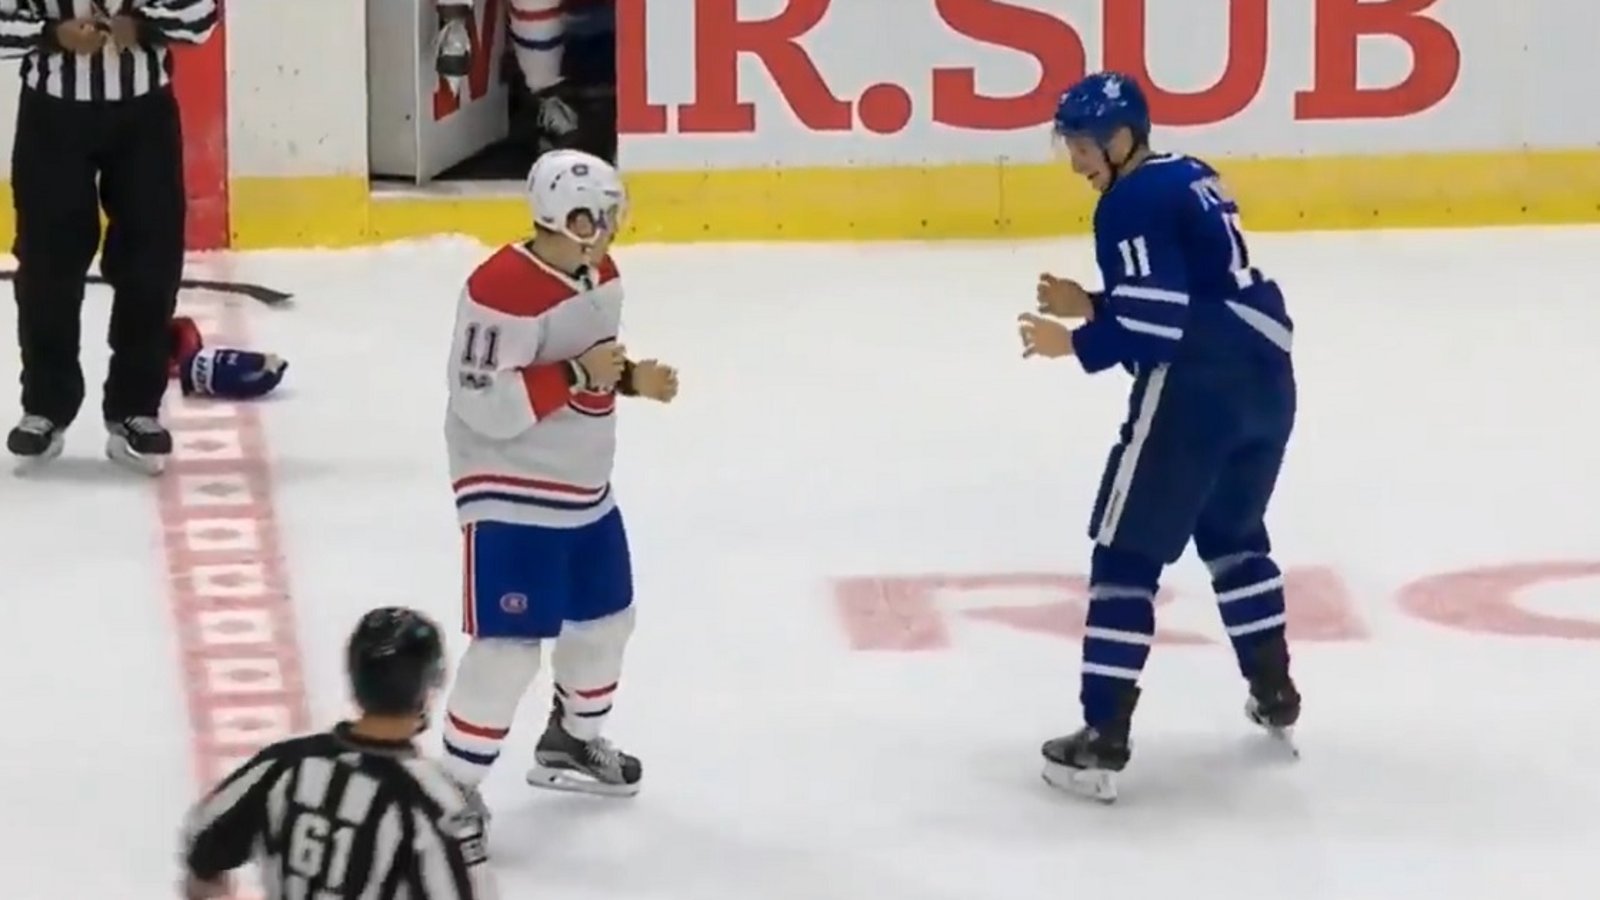 Early fight between the Habs and the Leafs on Monday night.